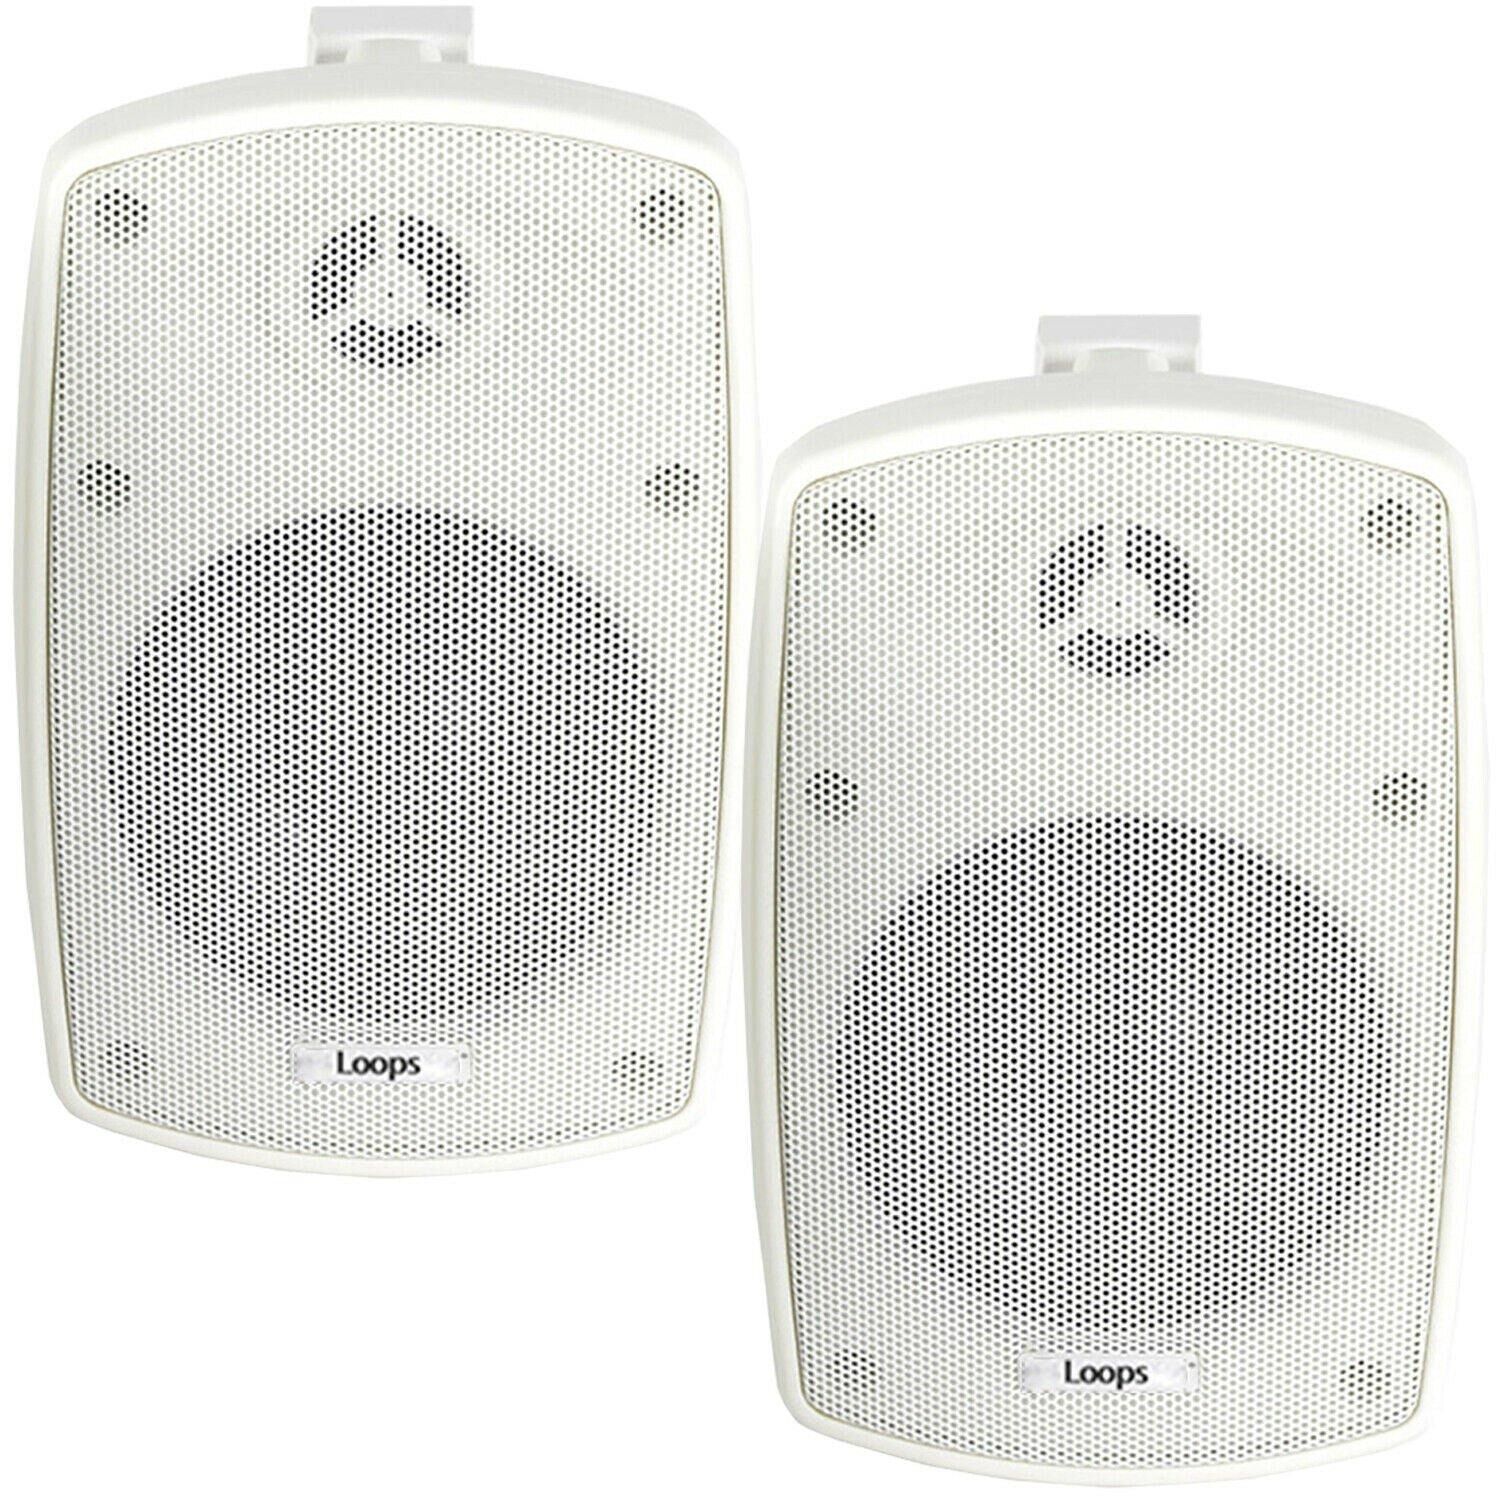 Loops 2x 8" 160W White Outdoor Rated Speakers 8 OHM Weatherproof Wall Mounted HiFi